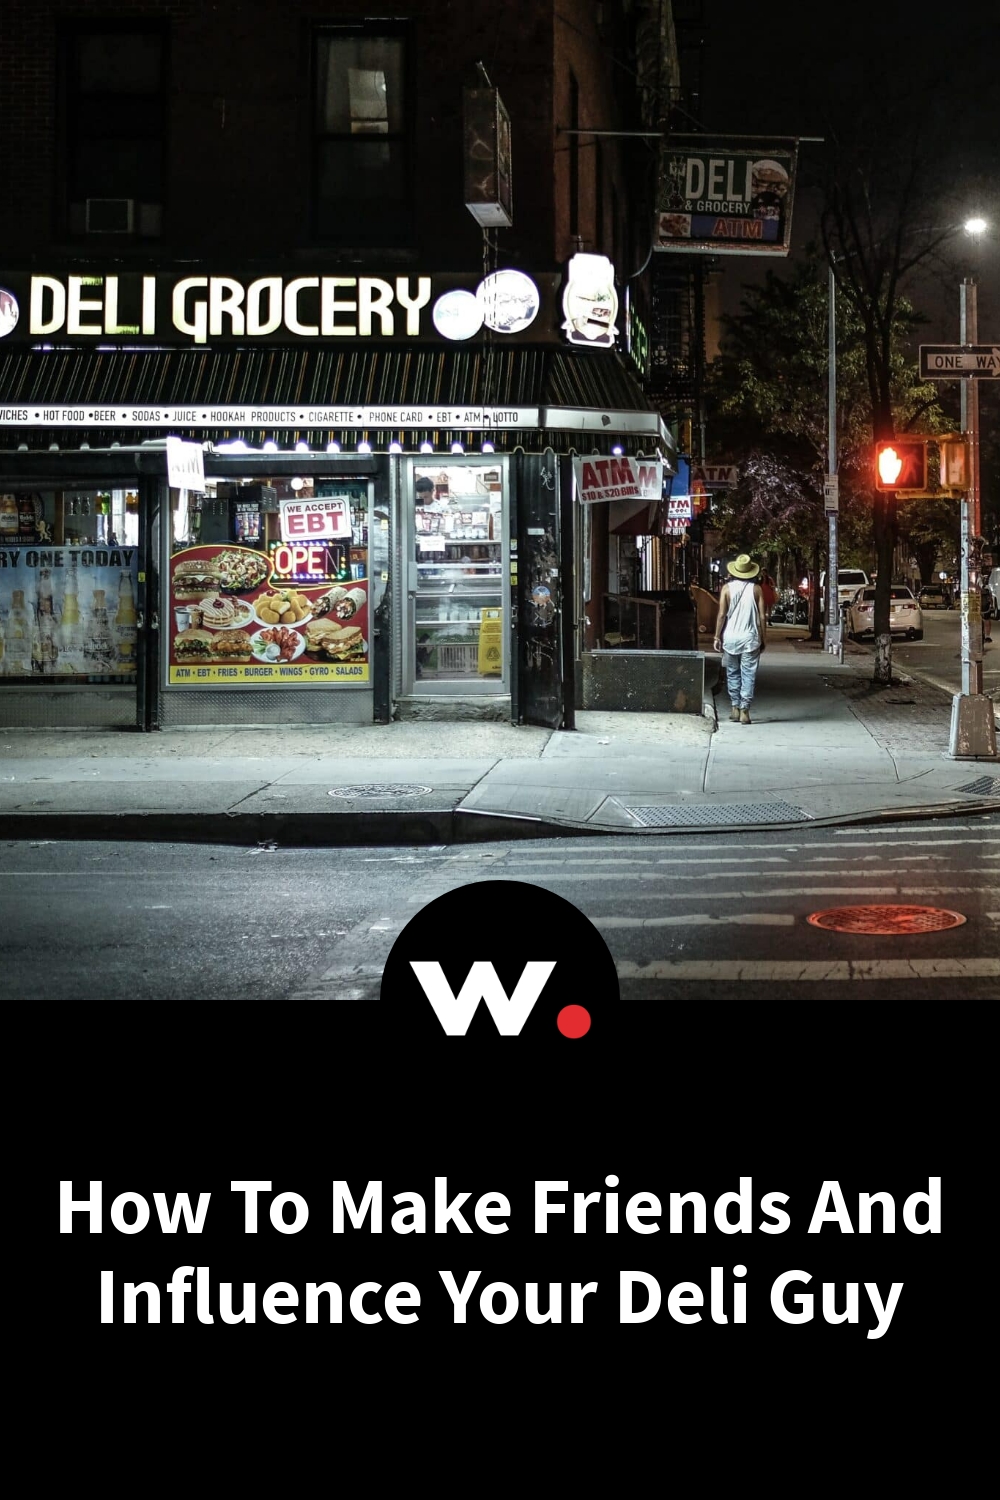 How To Make Friends And Influence Your Deli Guy